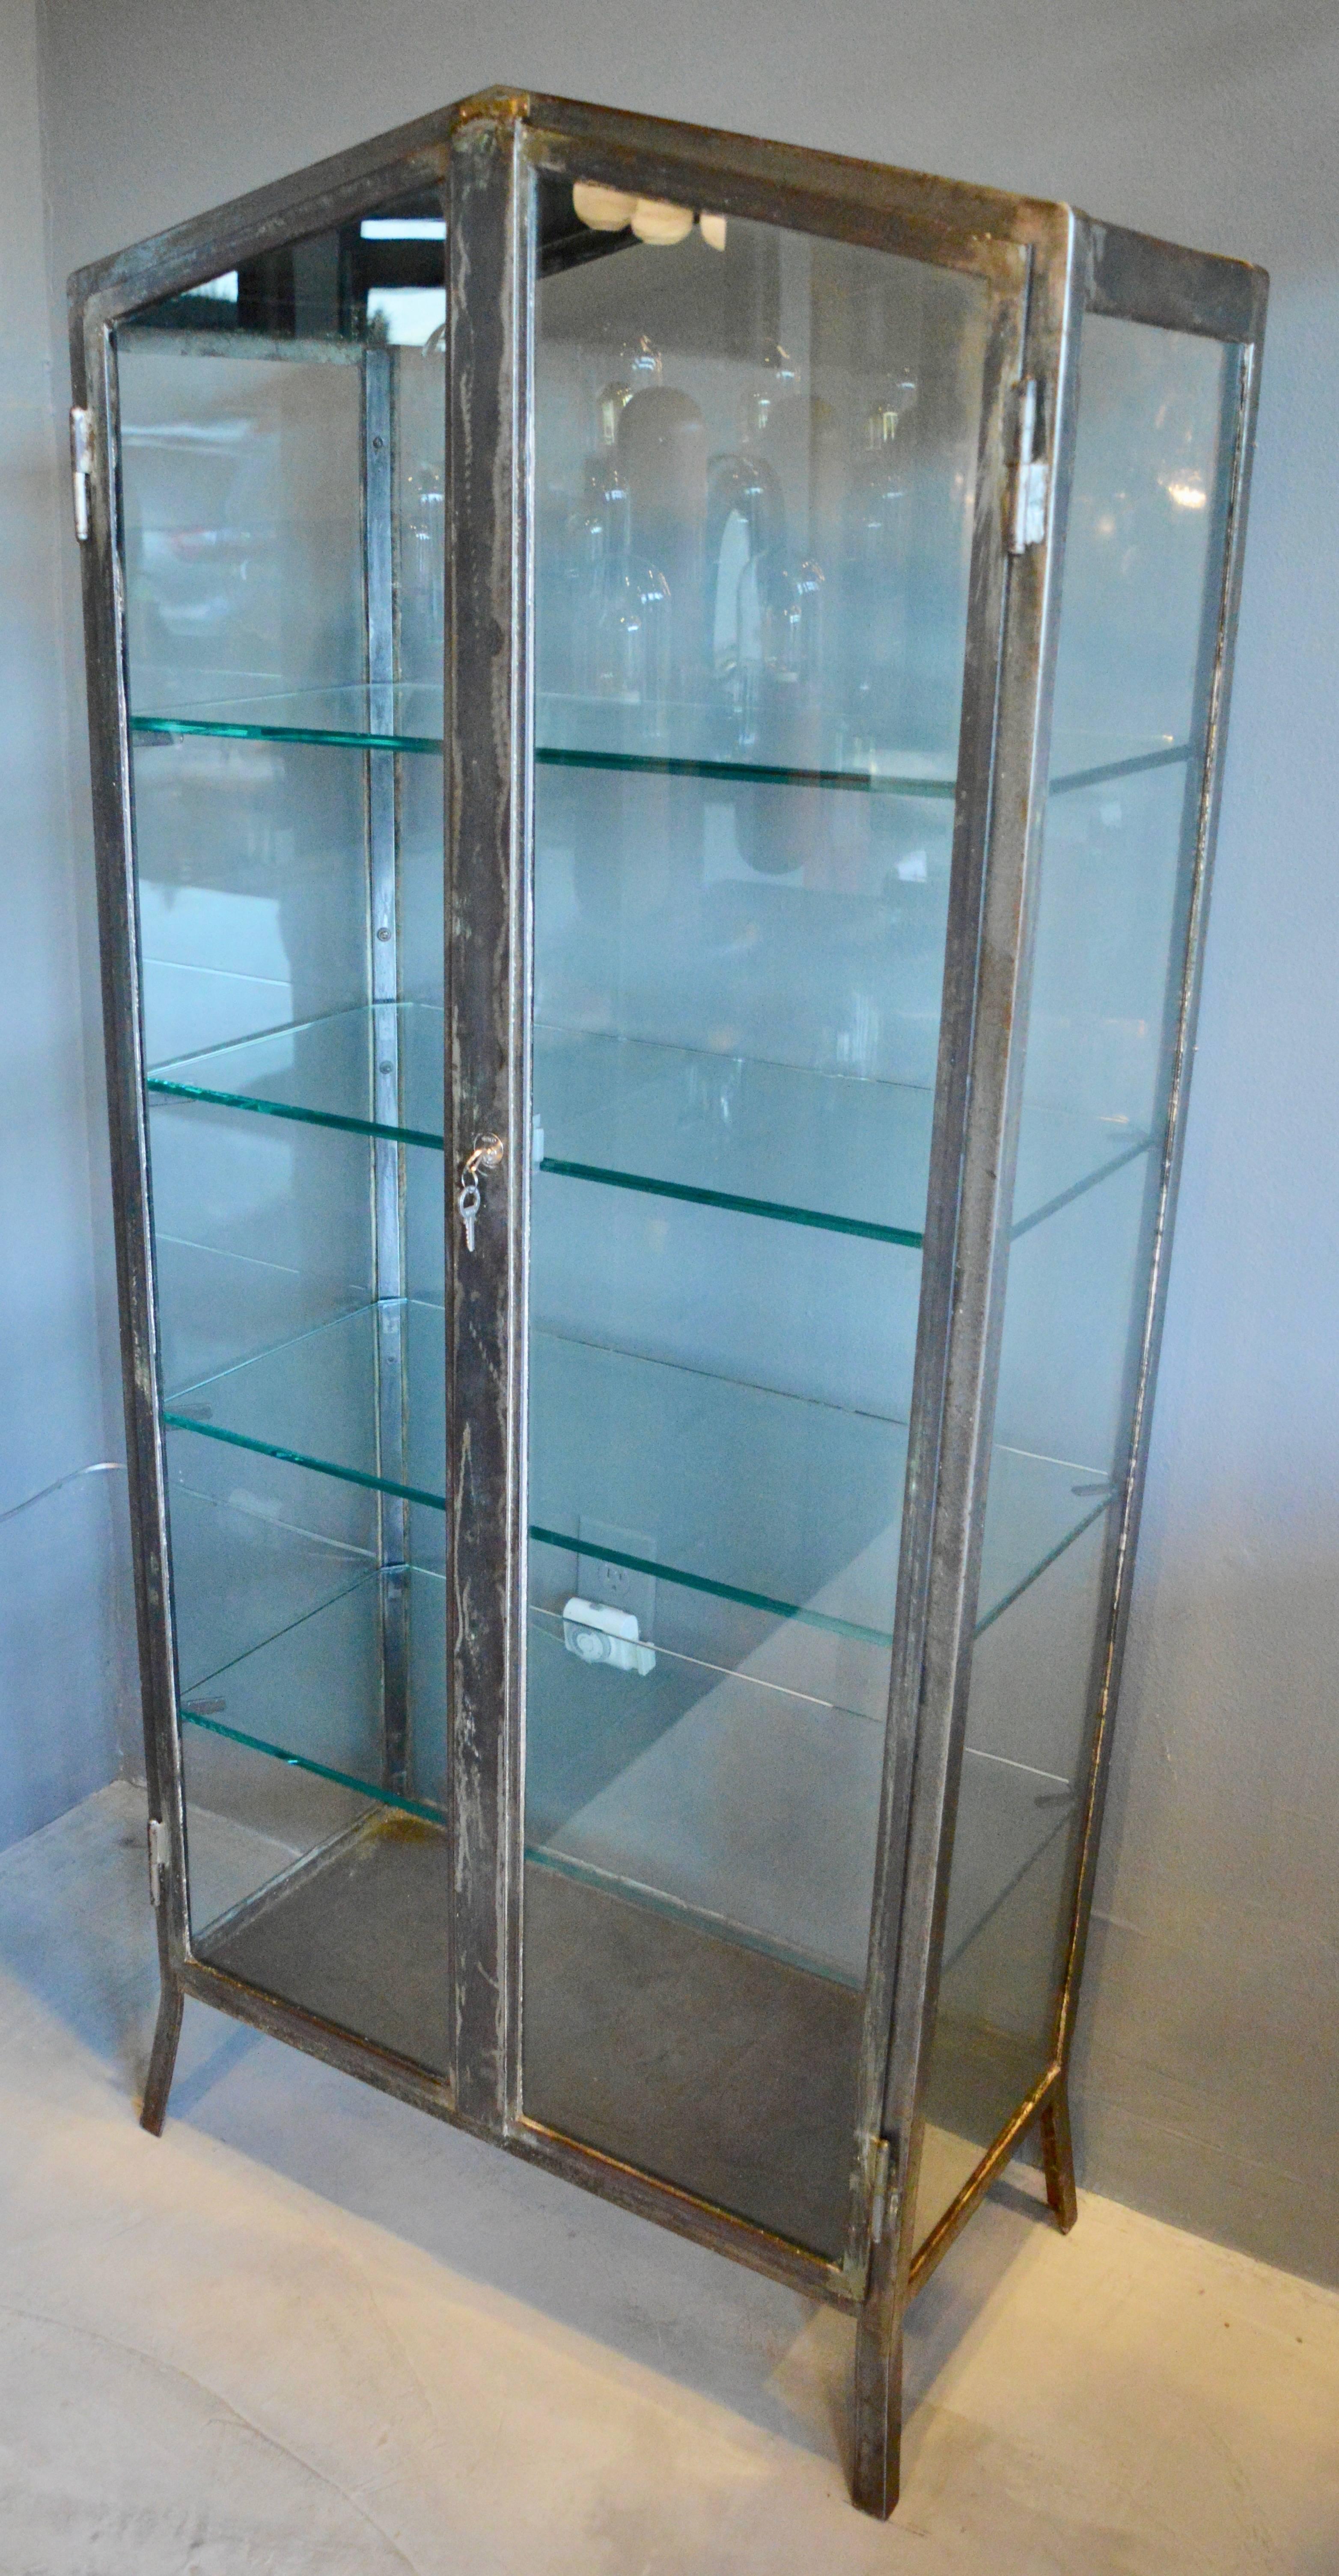 Very rare matching pair of iron and glass vitrines from the 1930s. Handcrafted in Buenos Aires, with all original hardware and glass frame. Newly made thick glass shelves with notched corners to fit snugly inside. Fantastic locking mechanism inside